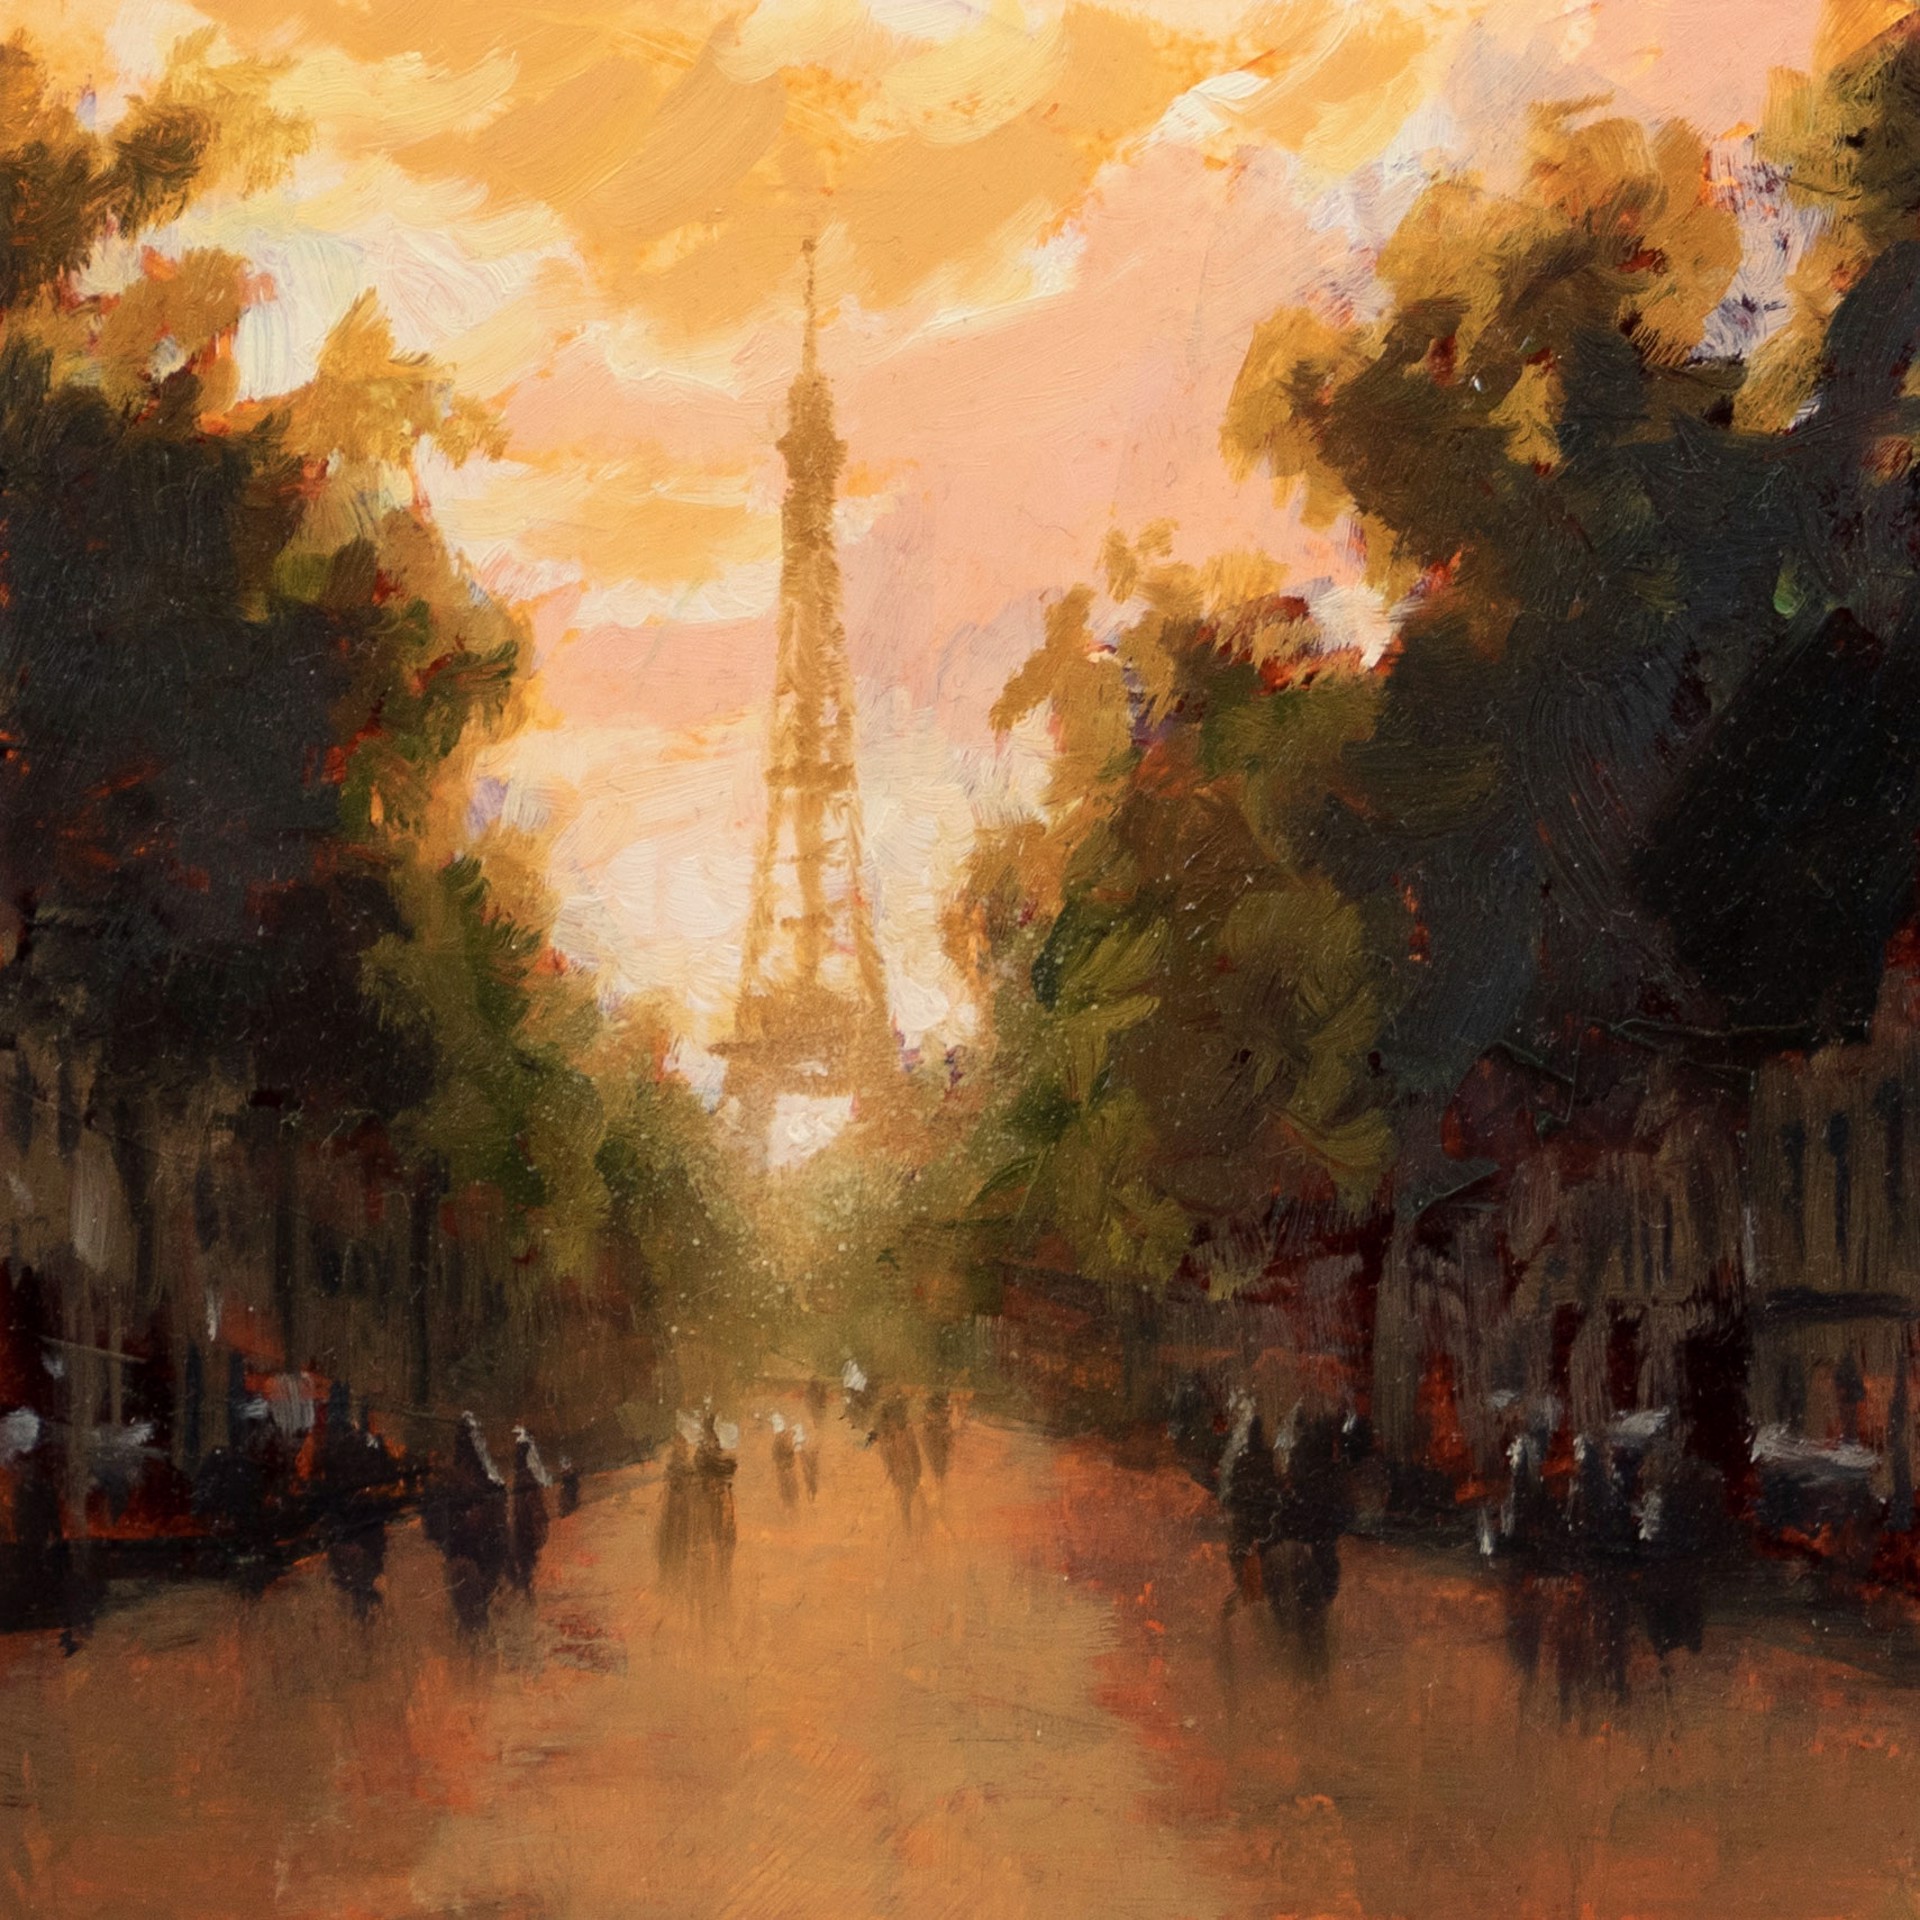 Story of Paris Vol 2, no 15 by Christopher Clark